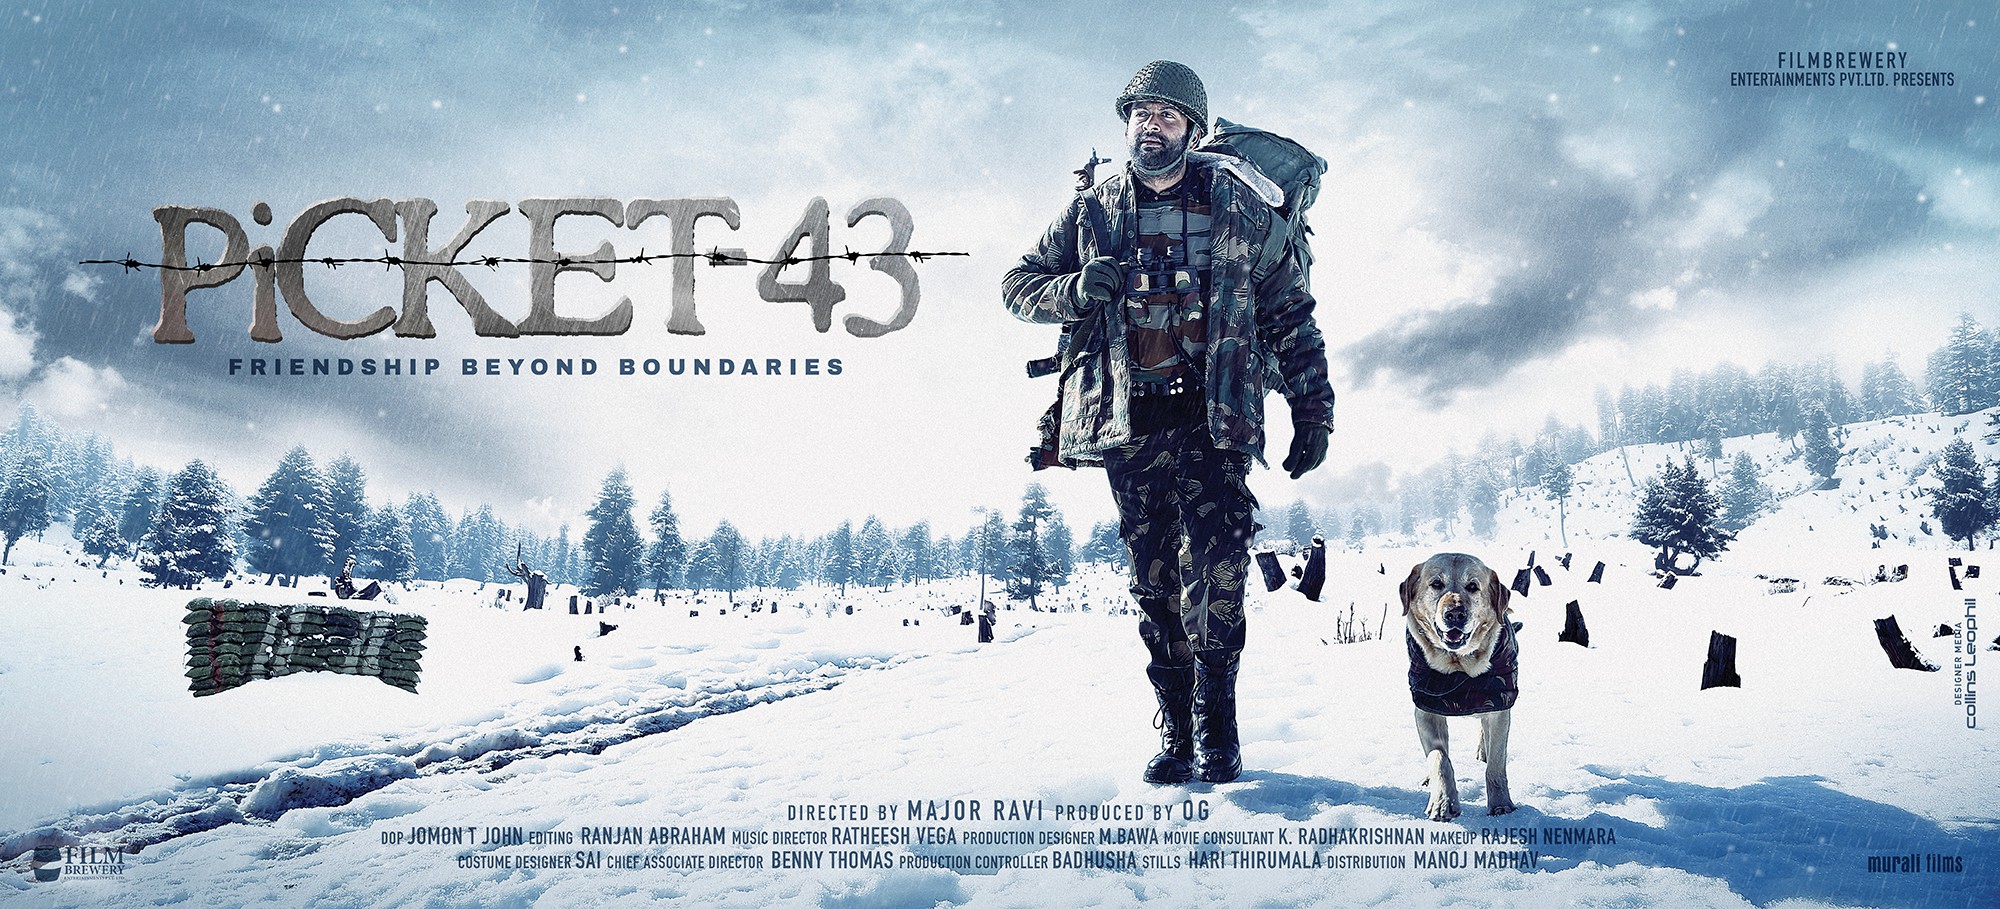 Mega Sized Movie Poster Image for Picket 43 (#3 of 8)